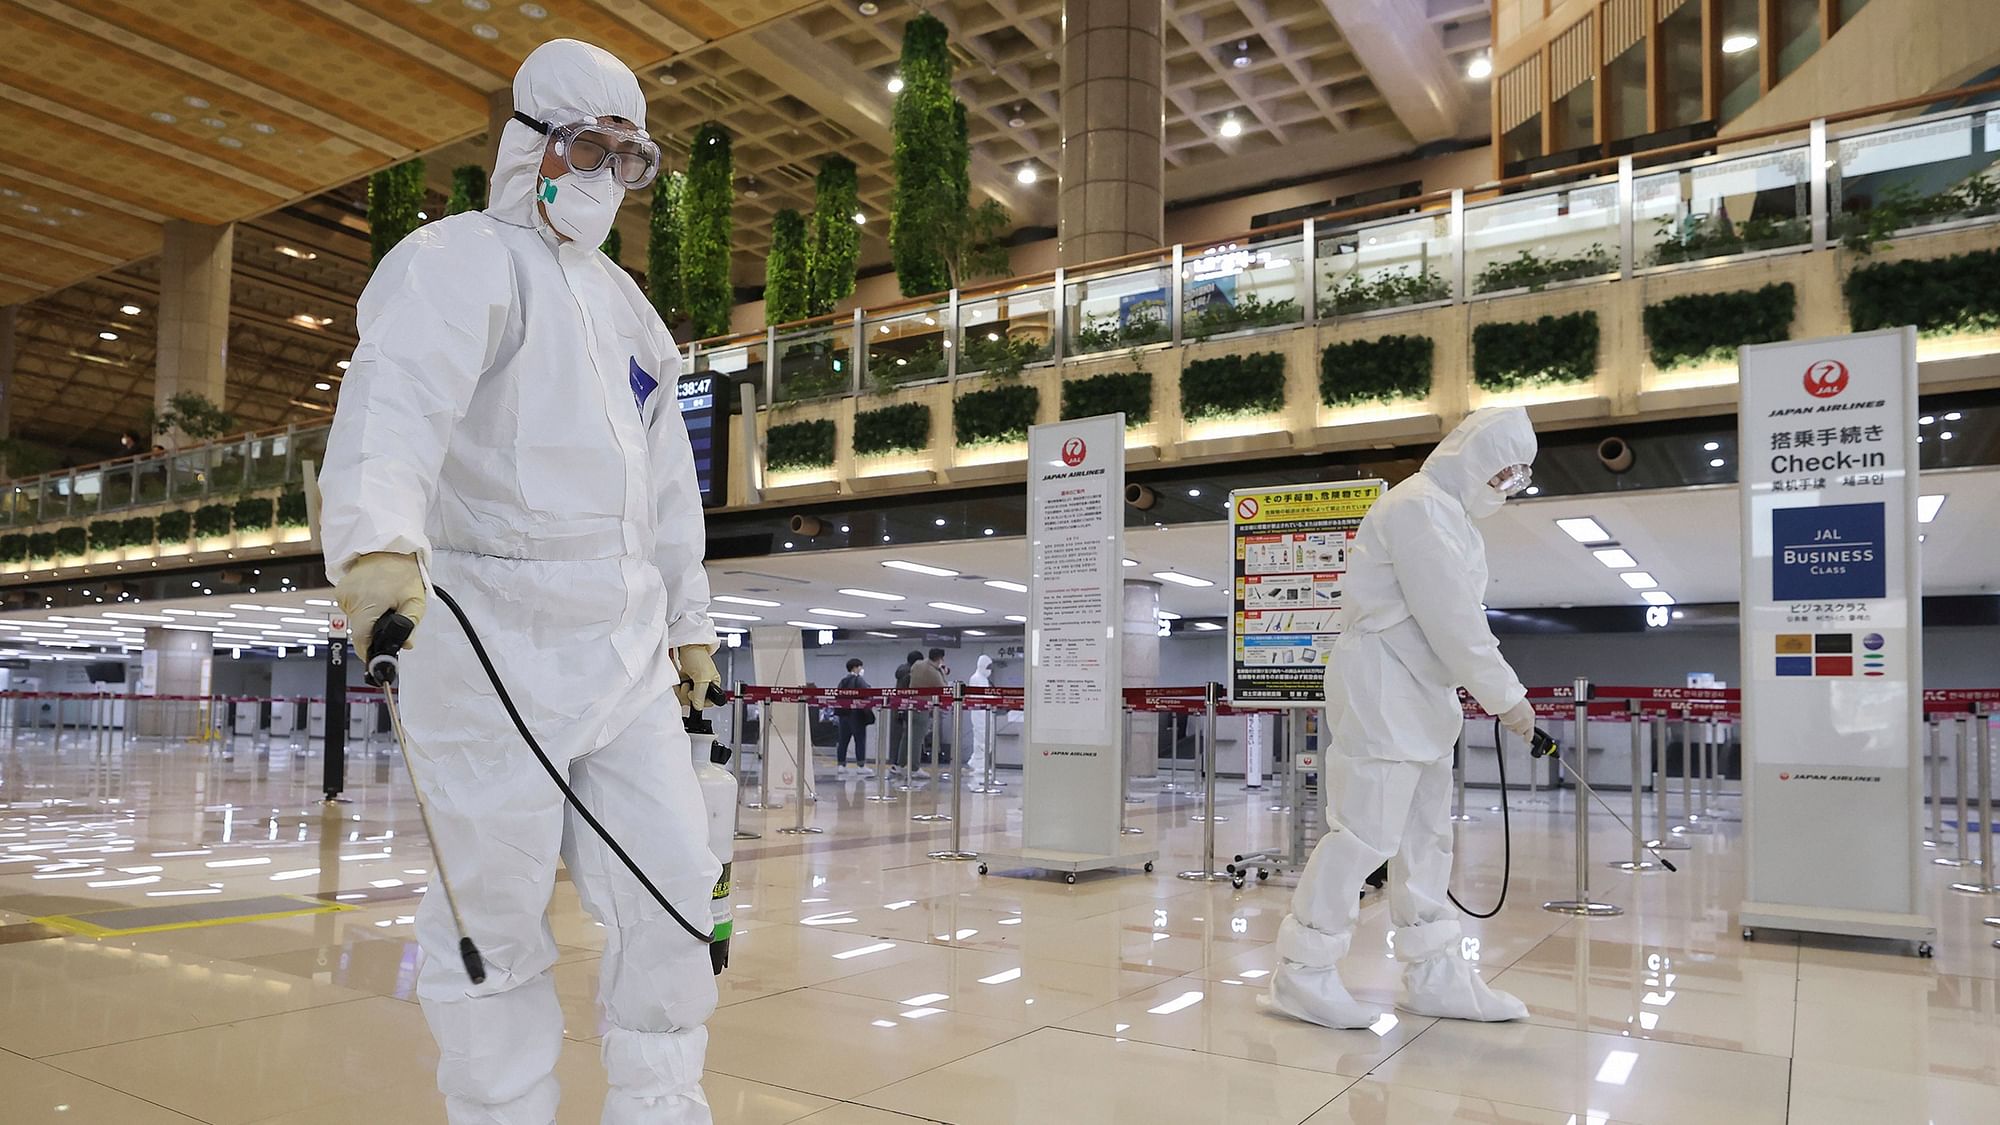 Workers spray disinfectant as a precaution against the coronavirus at the Gimpo Airport in Seoul, South Korea.